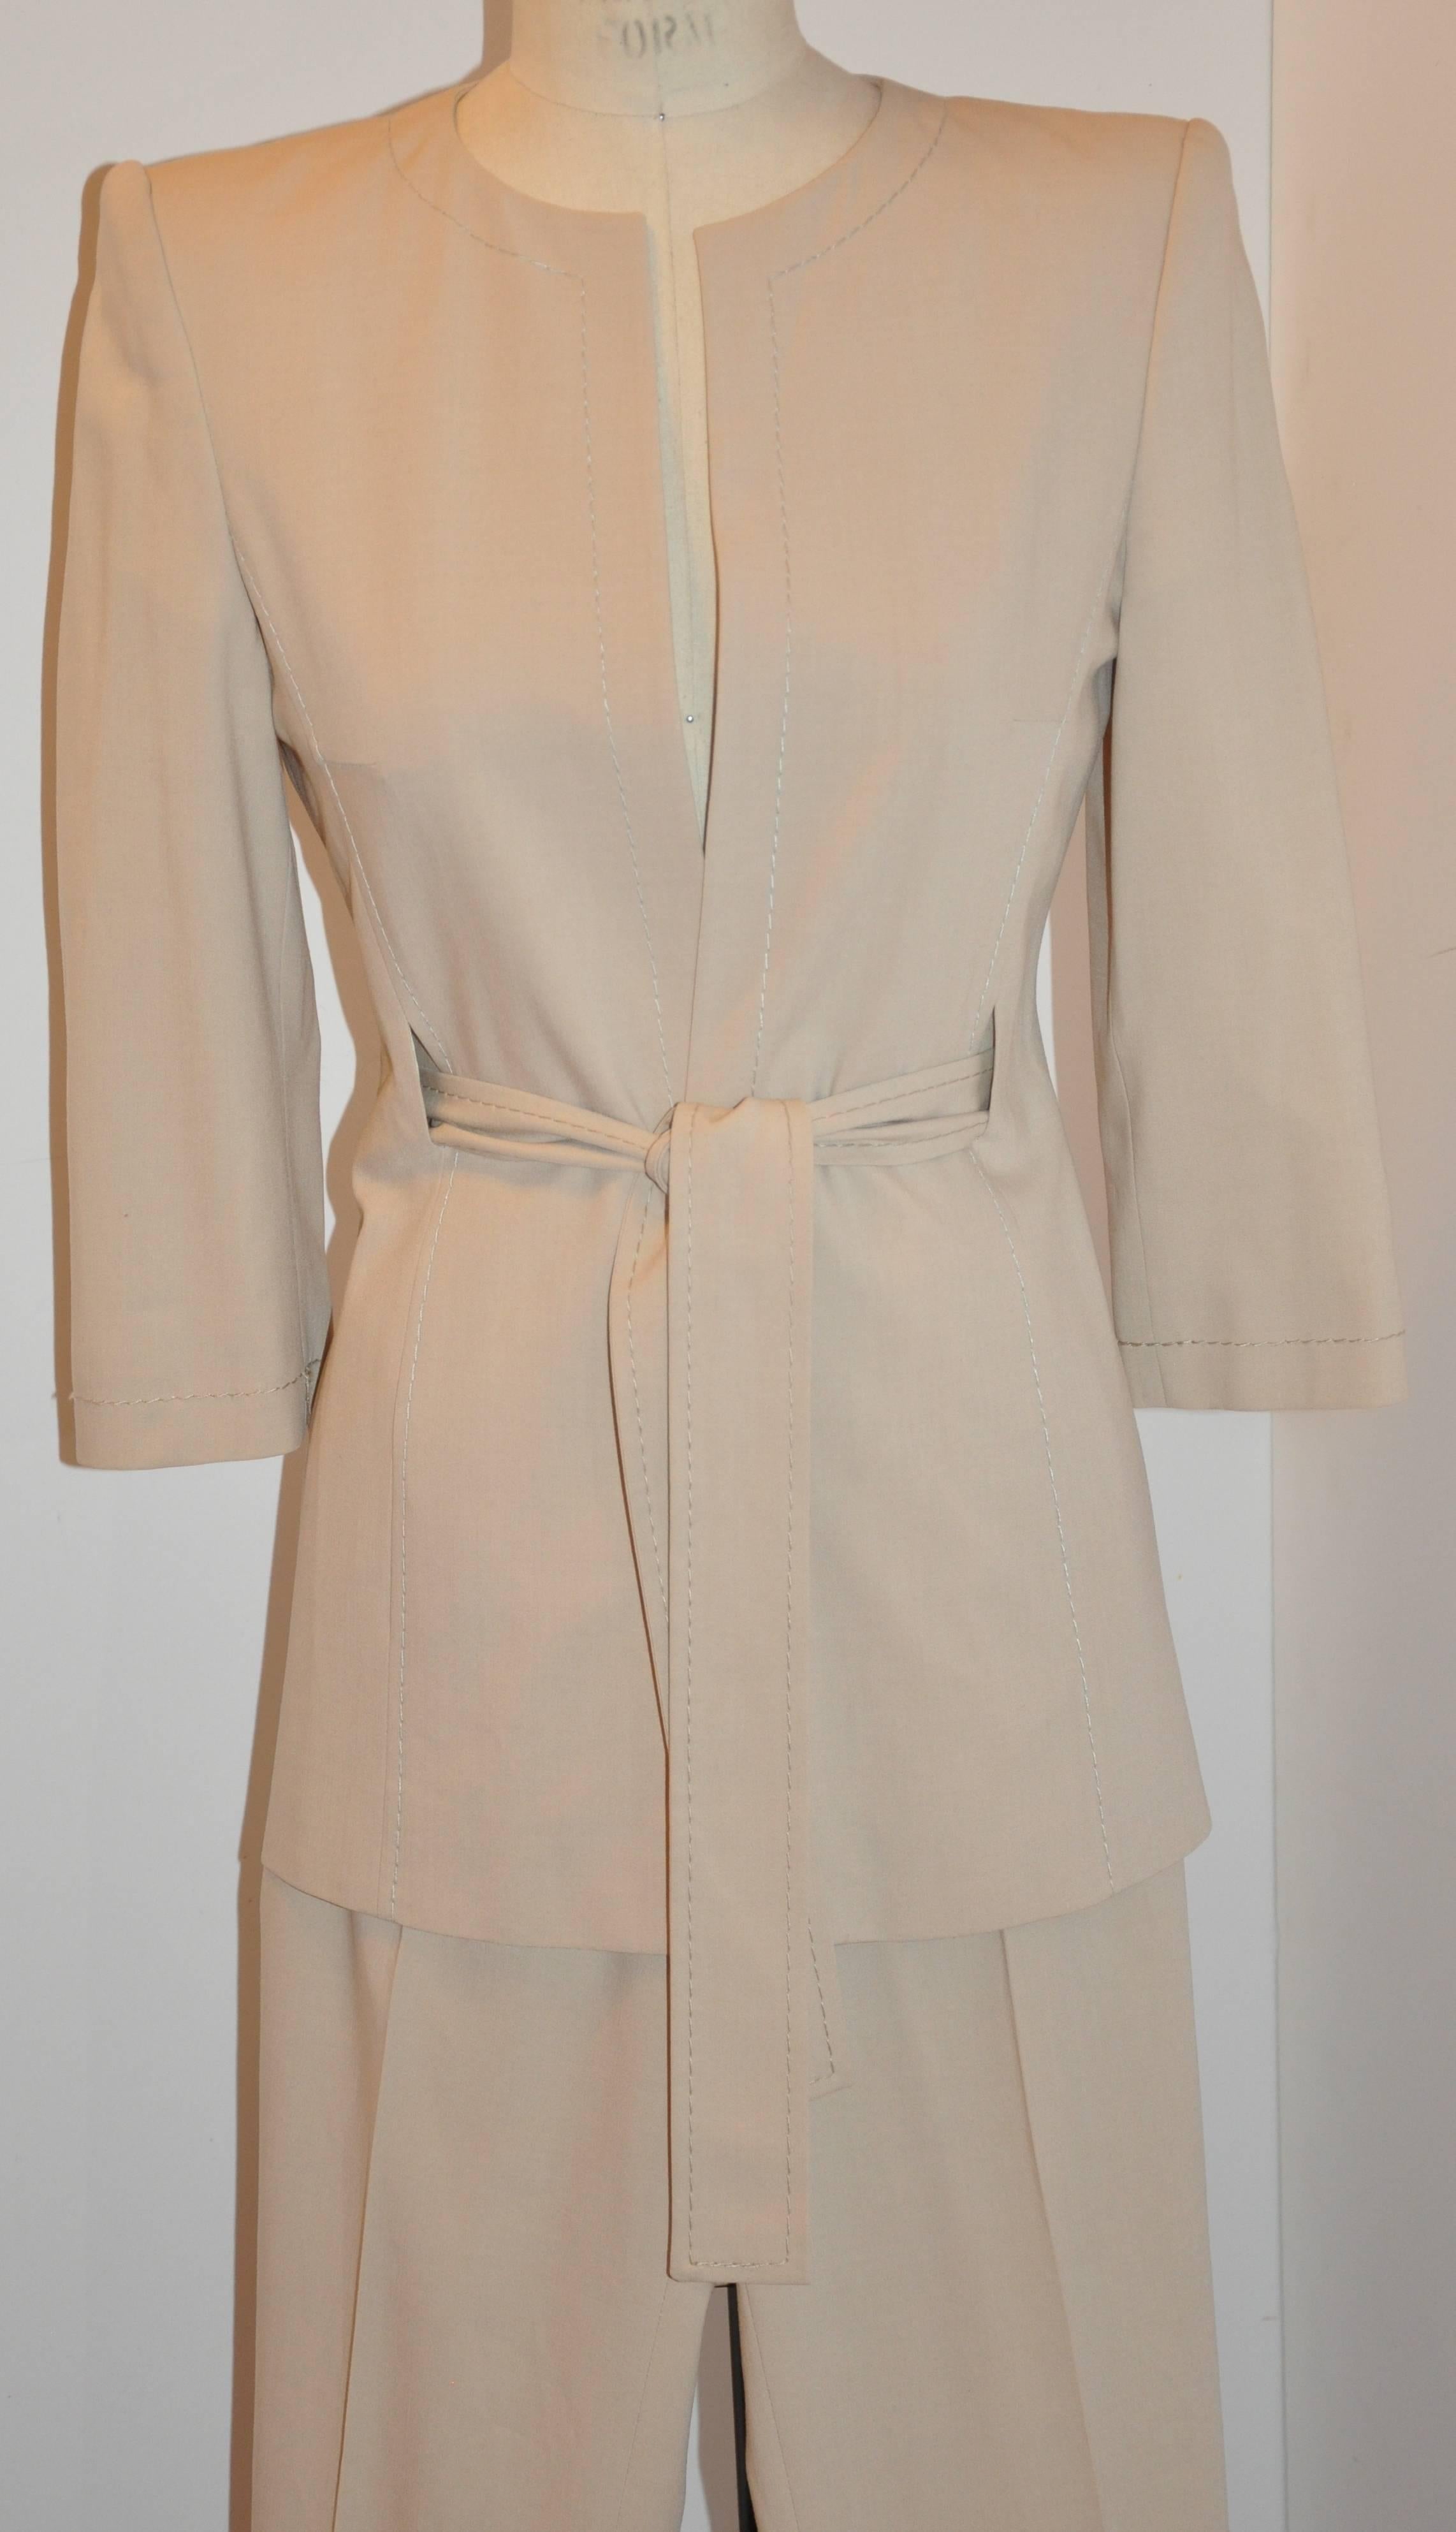        GianFranco Ferre wonderfully detailed silk beige tapered pantsuit with three-quarters sleeves is accented with hand-stitched silk cord along all edges. The self-tie matching belt, which, measures 2 inches by 62 inches can be tied or left